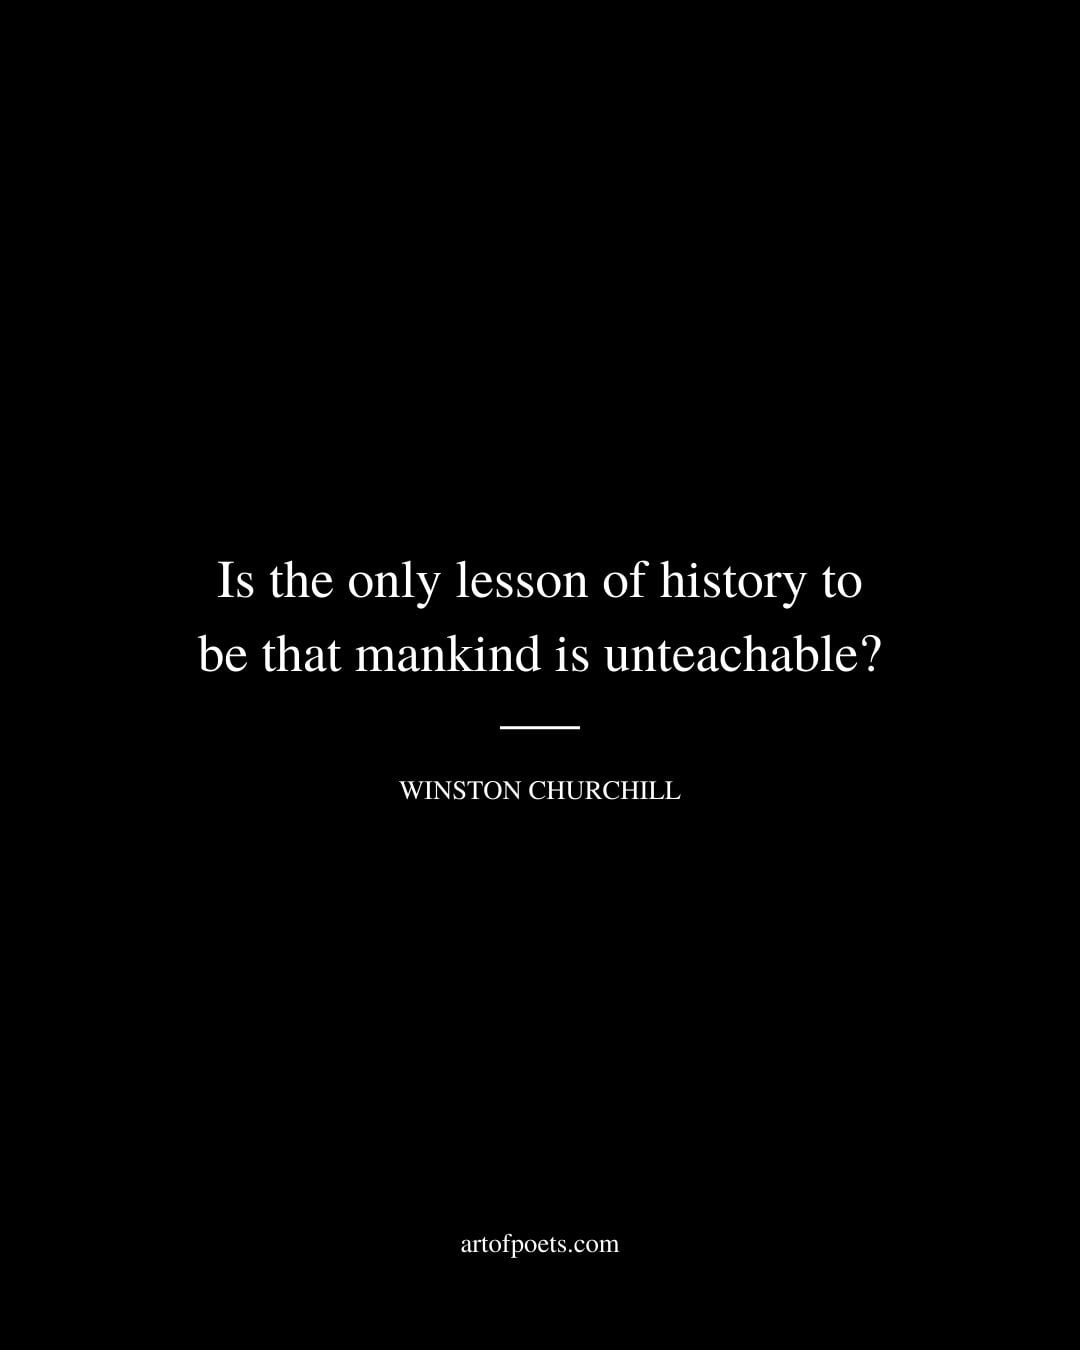 Is the only lesson of history to be that mankind is unteachable